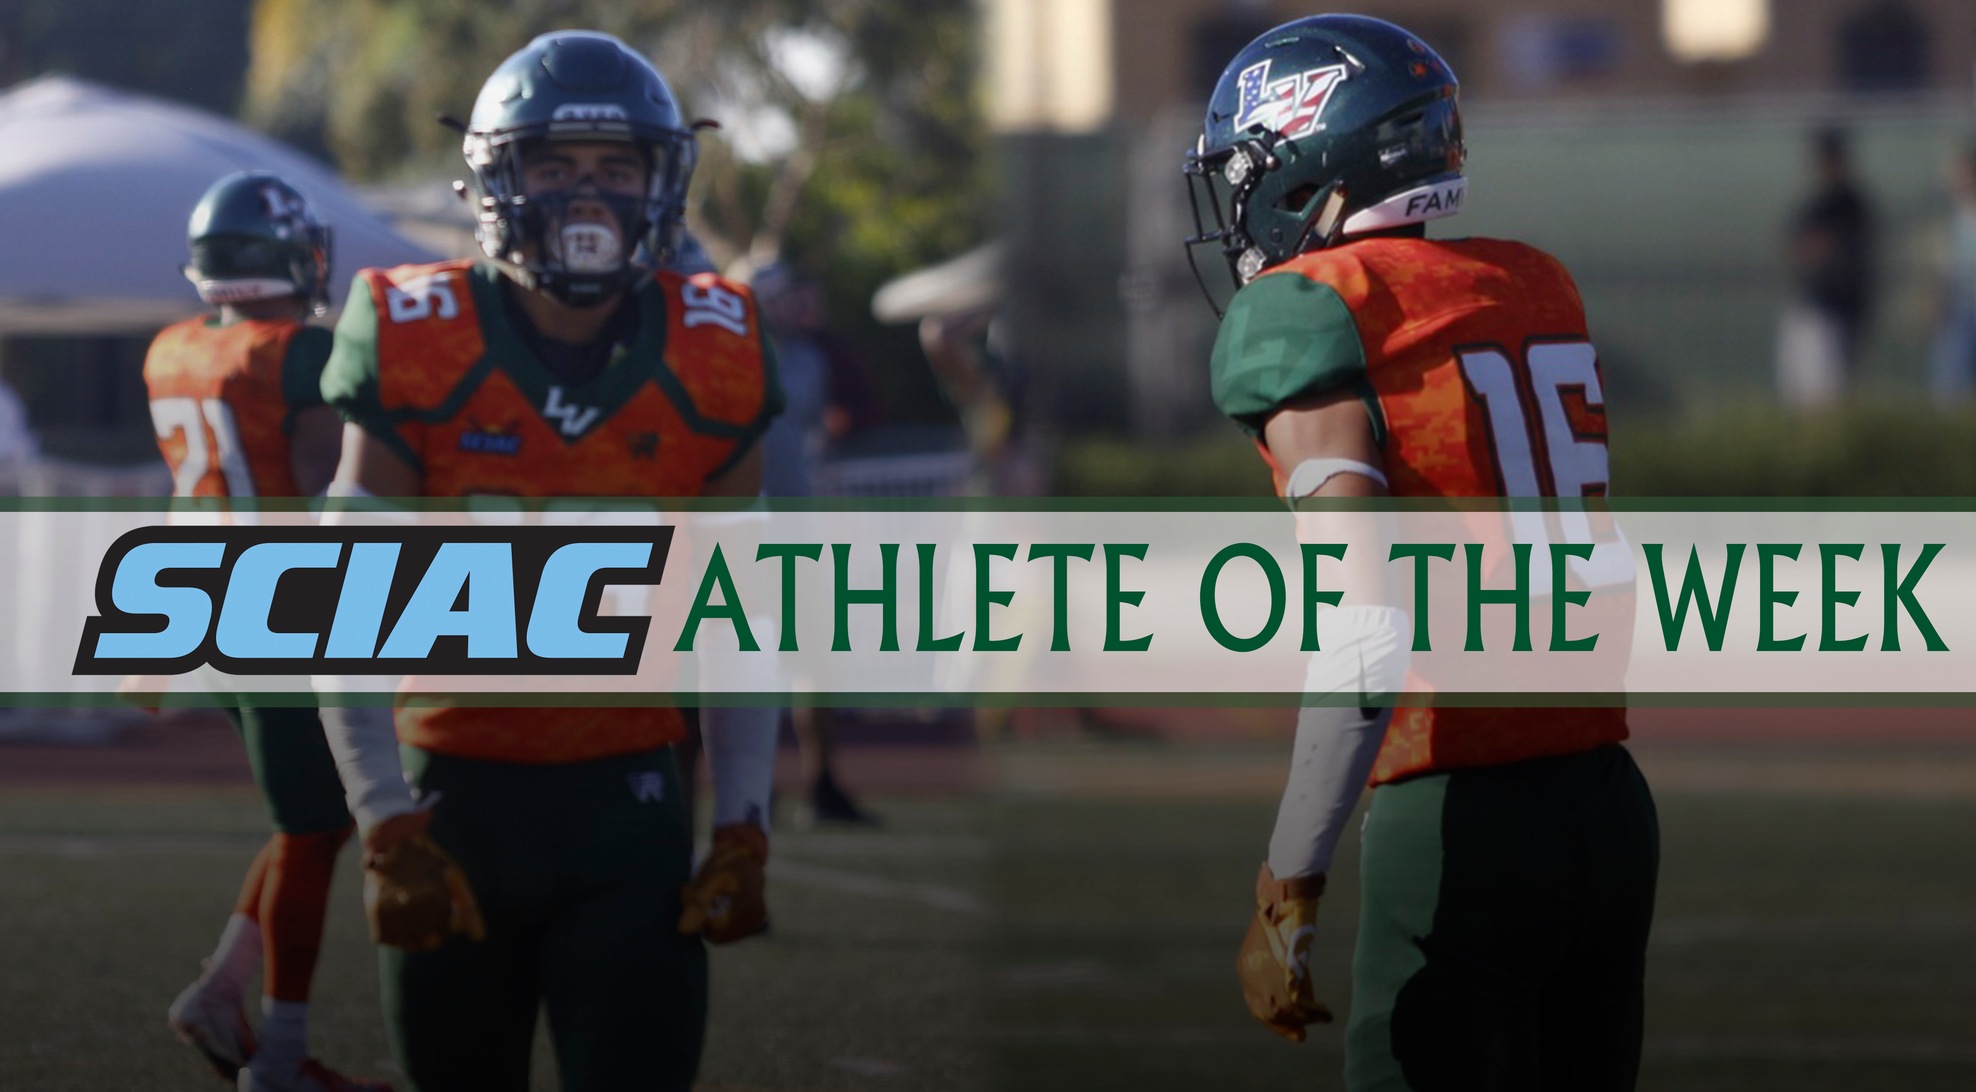 Moronez Named Back-to-Back SCIAC Athlete of the Week